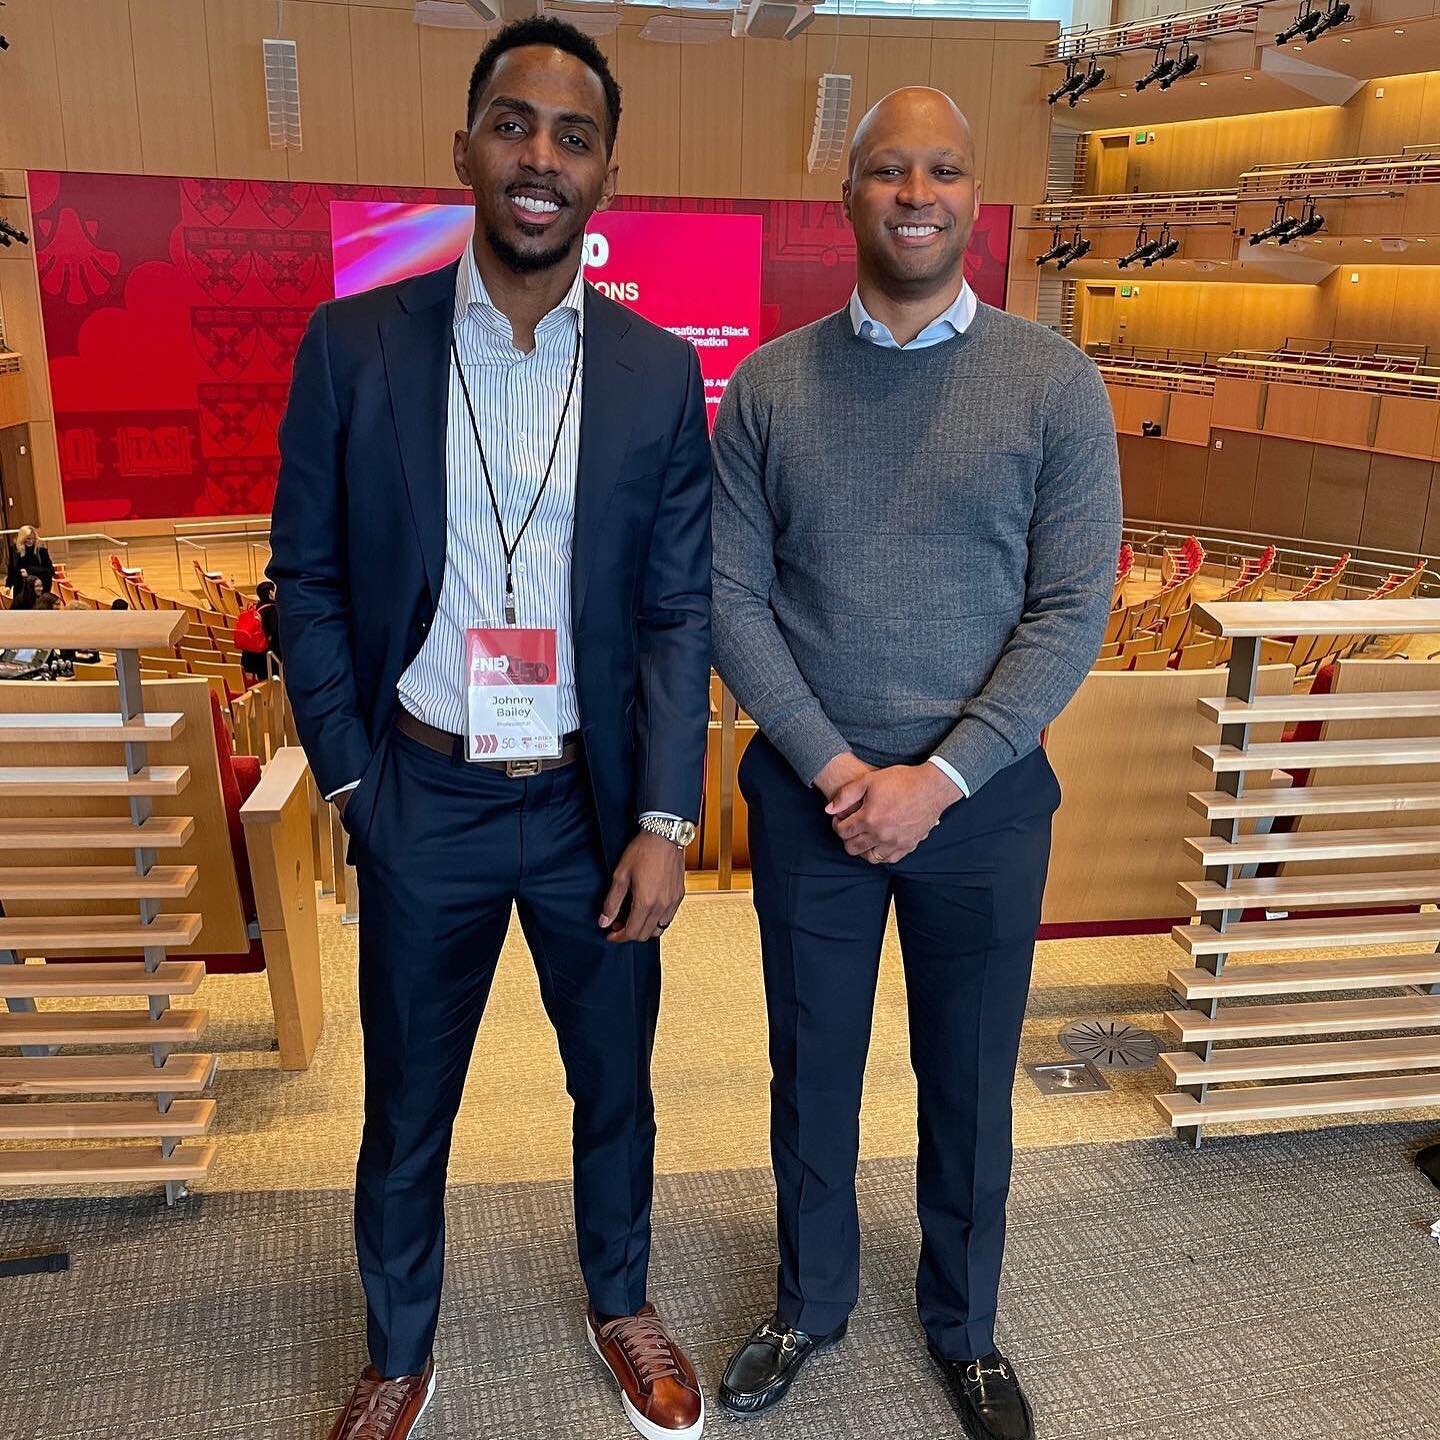 The #ShineHardFamily reconnecting at the H. Naylor Fitzhugh Conference hosted by @aasuhbs. 

8 years ago @chrismalone sat down with @1johnnybailey for a convo about success mindset and legacy building. [#Swipe]

8 years later, Chris is the CFO of @al